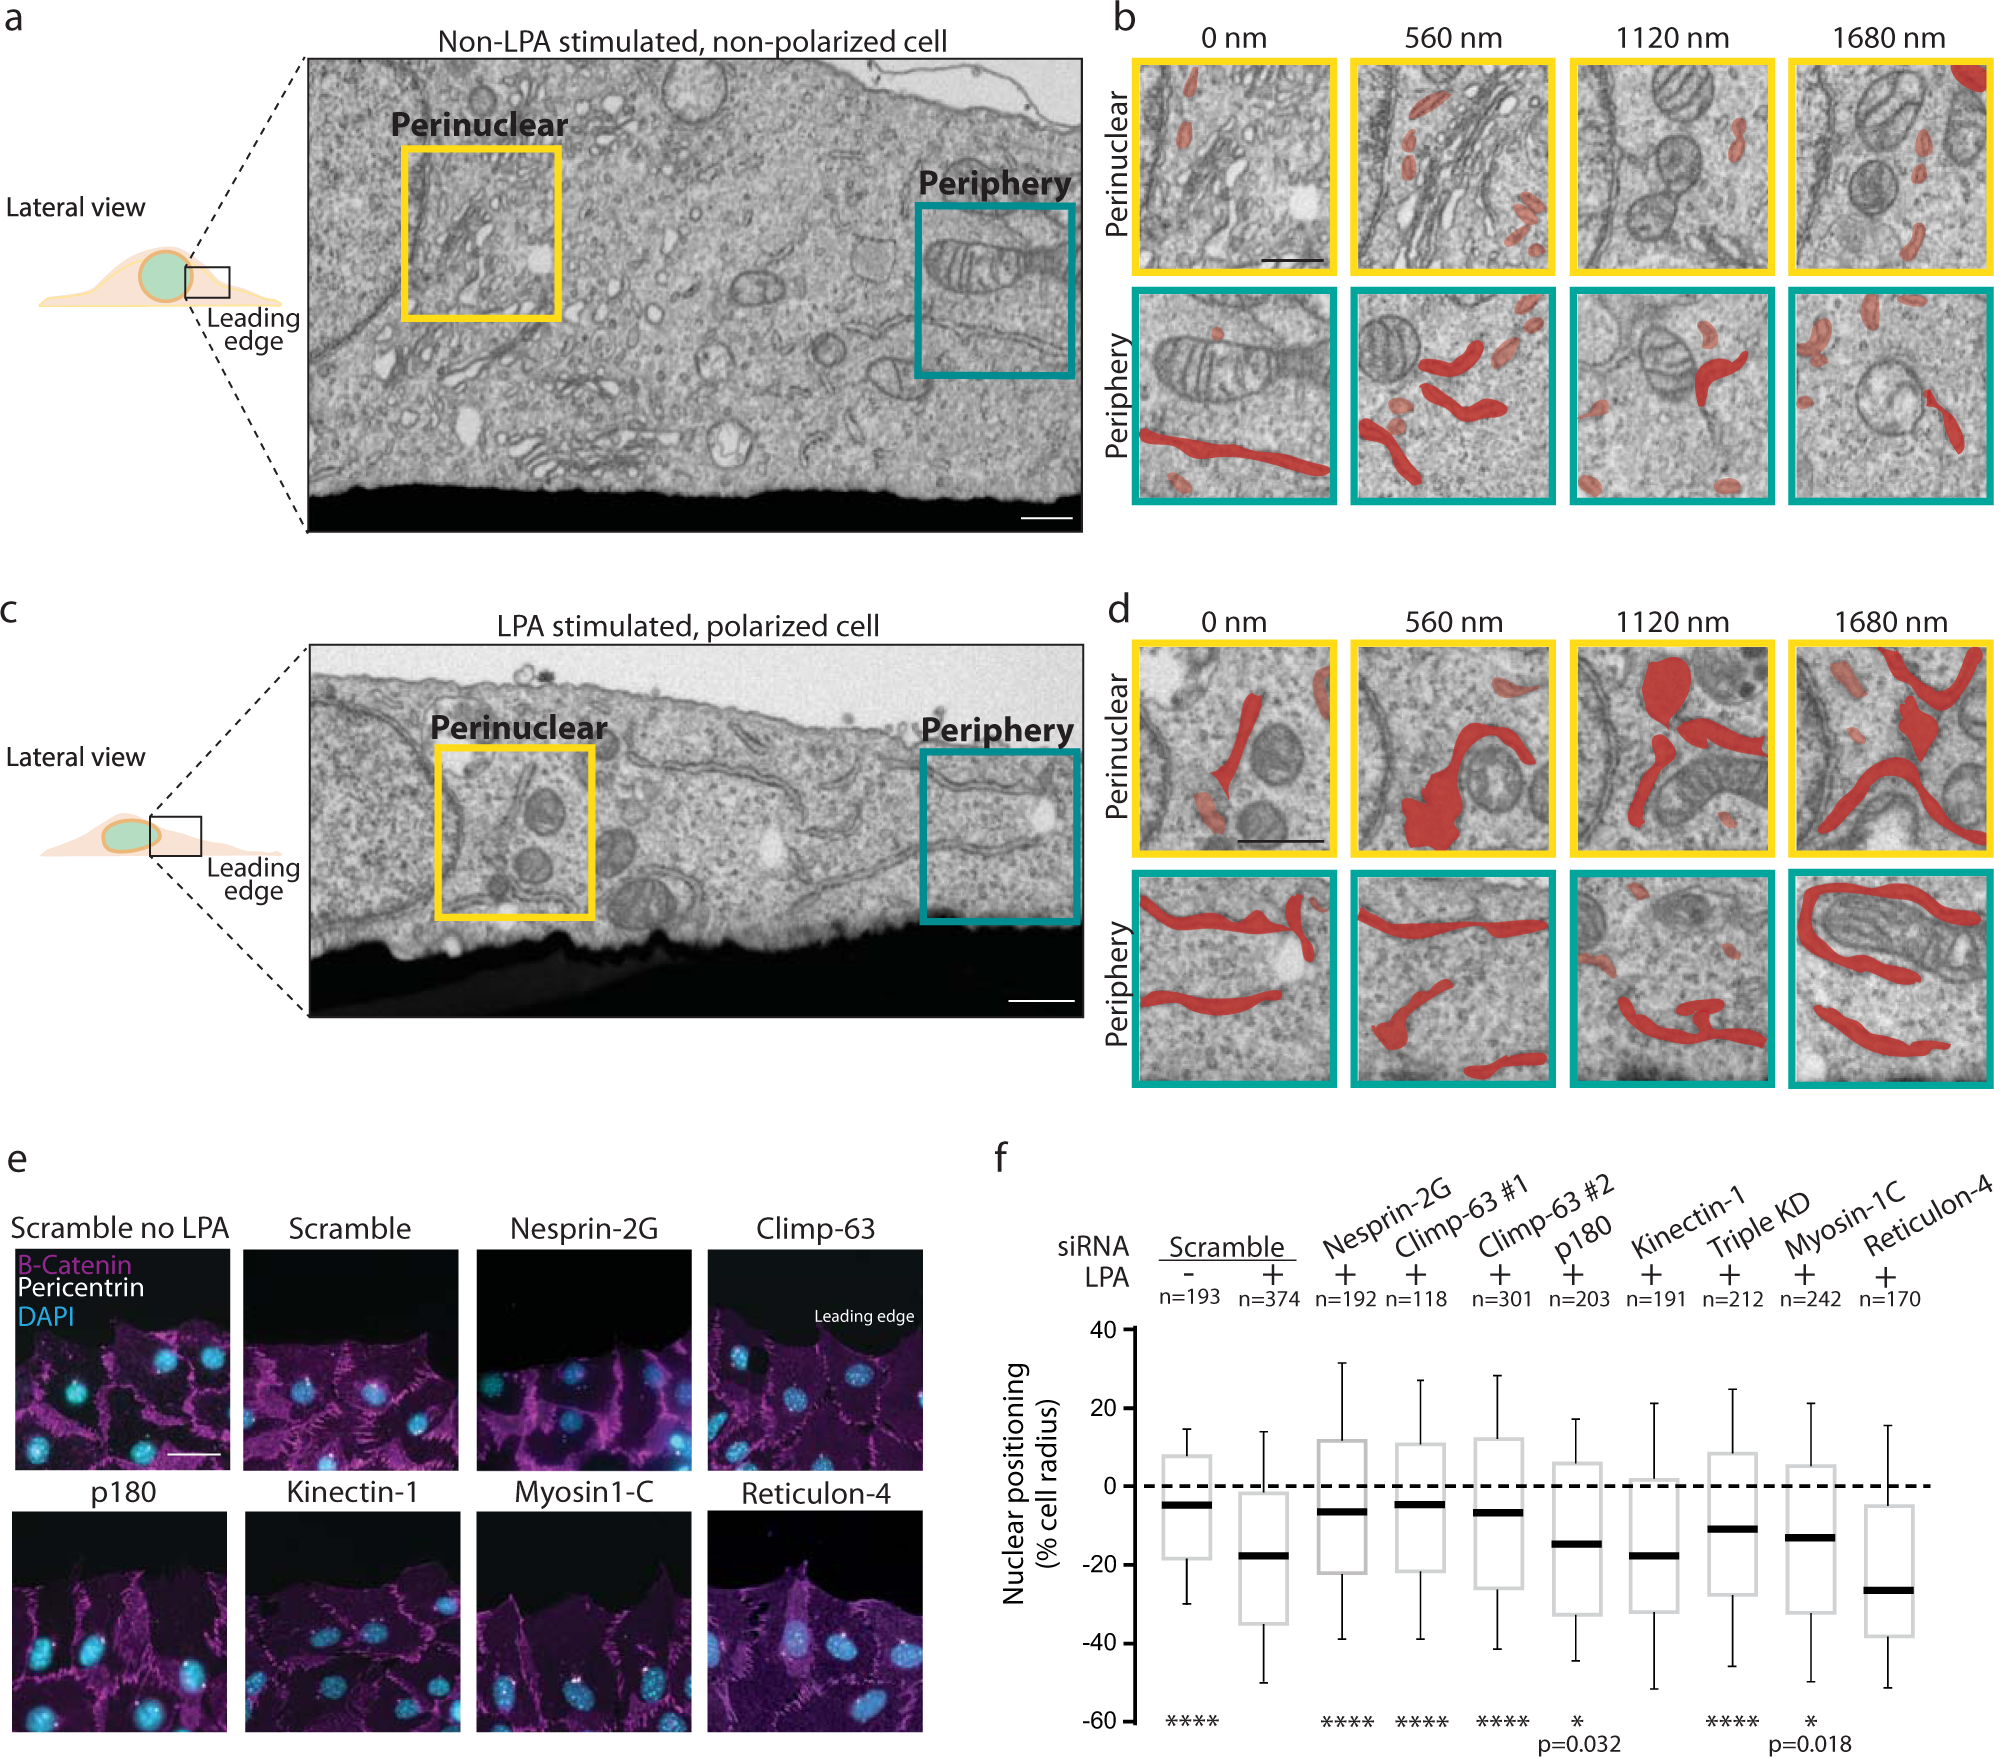 Shielding of actin by the endoplasmic reticulum impacts nuclear positioning  | Nature Communications